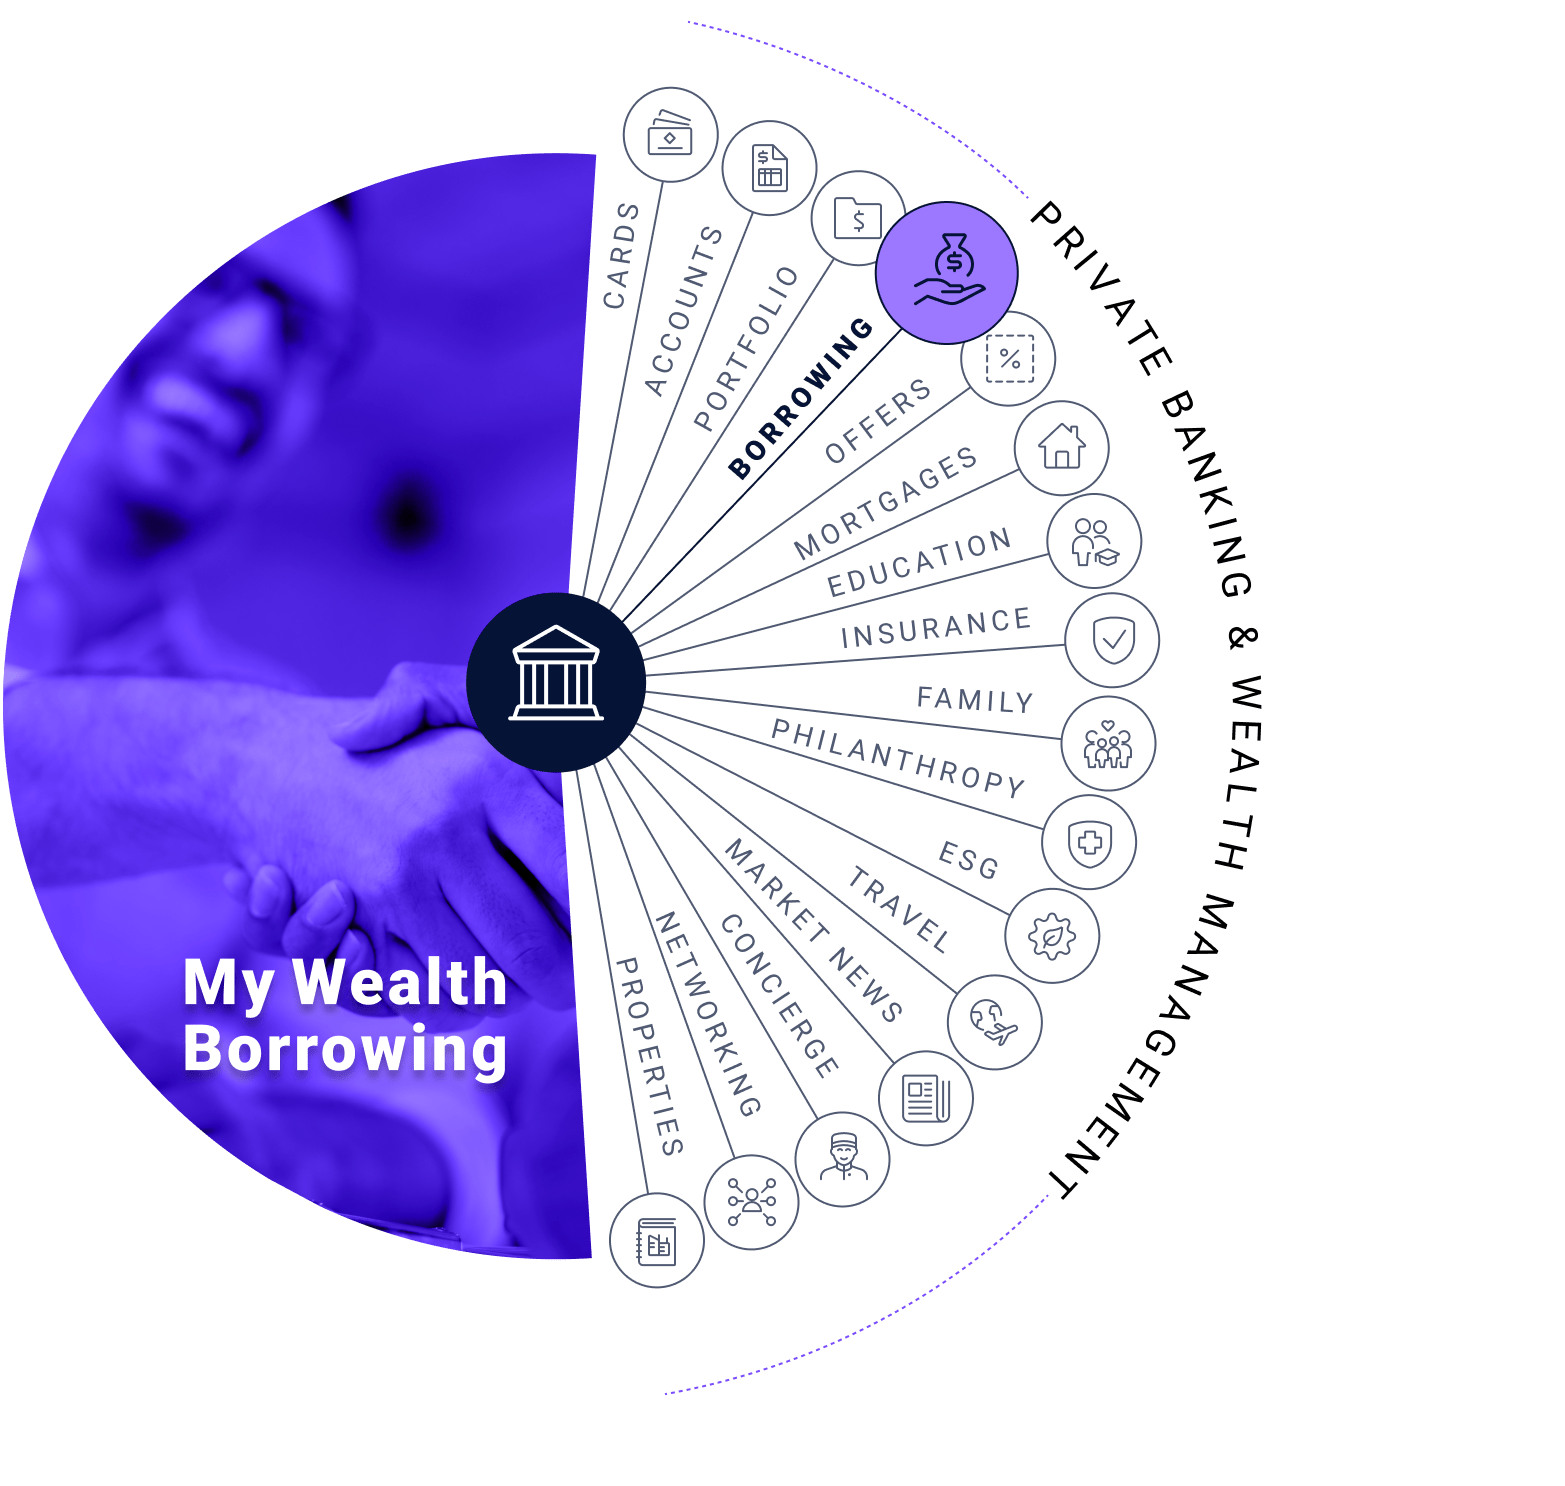 My Wealth borrowing: cards, accounts, portfolio, borrowing, offers, mortgages, education, insurance, family, philanthropy, esg, travel, market news, concierge, networking, and properties